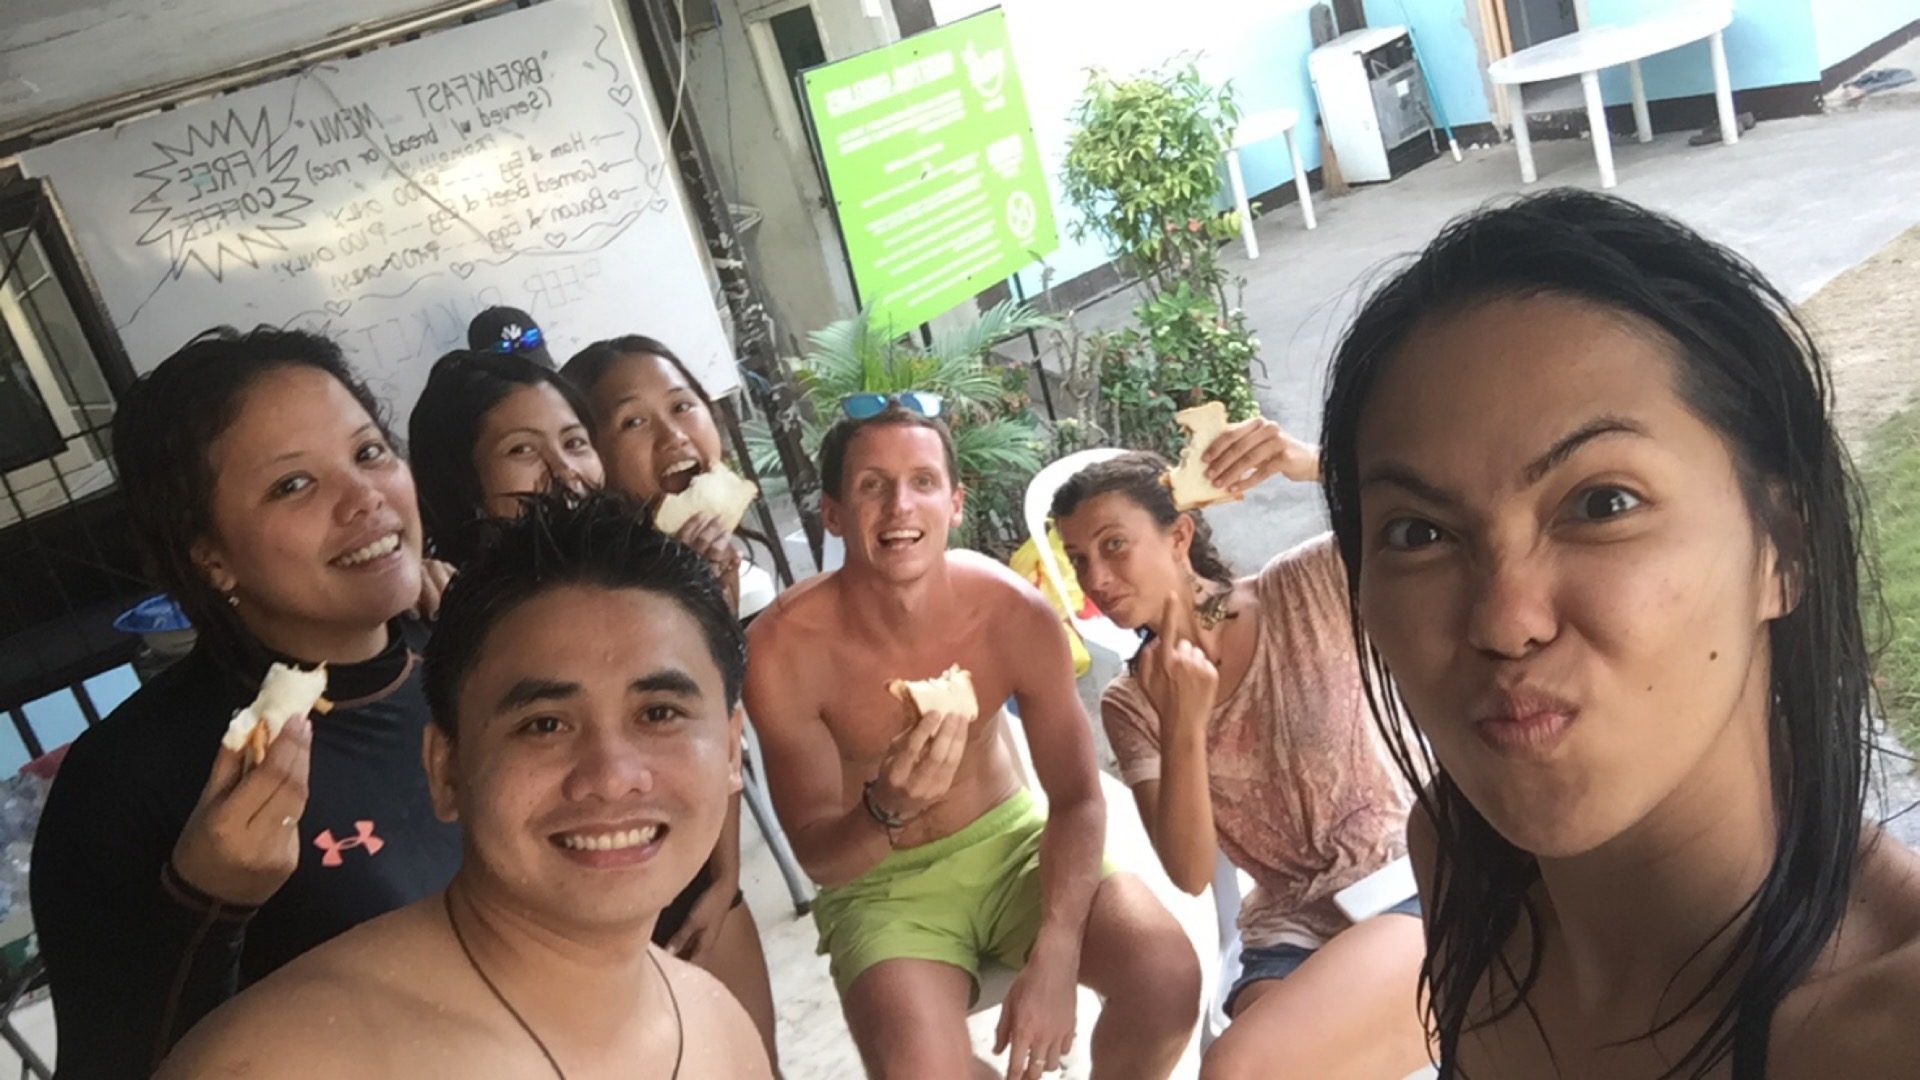 David Simpson and locals at pool party in Siquijor, Philippines. Friendly locals and Siquijor